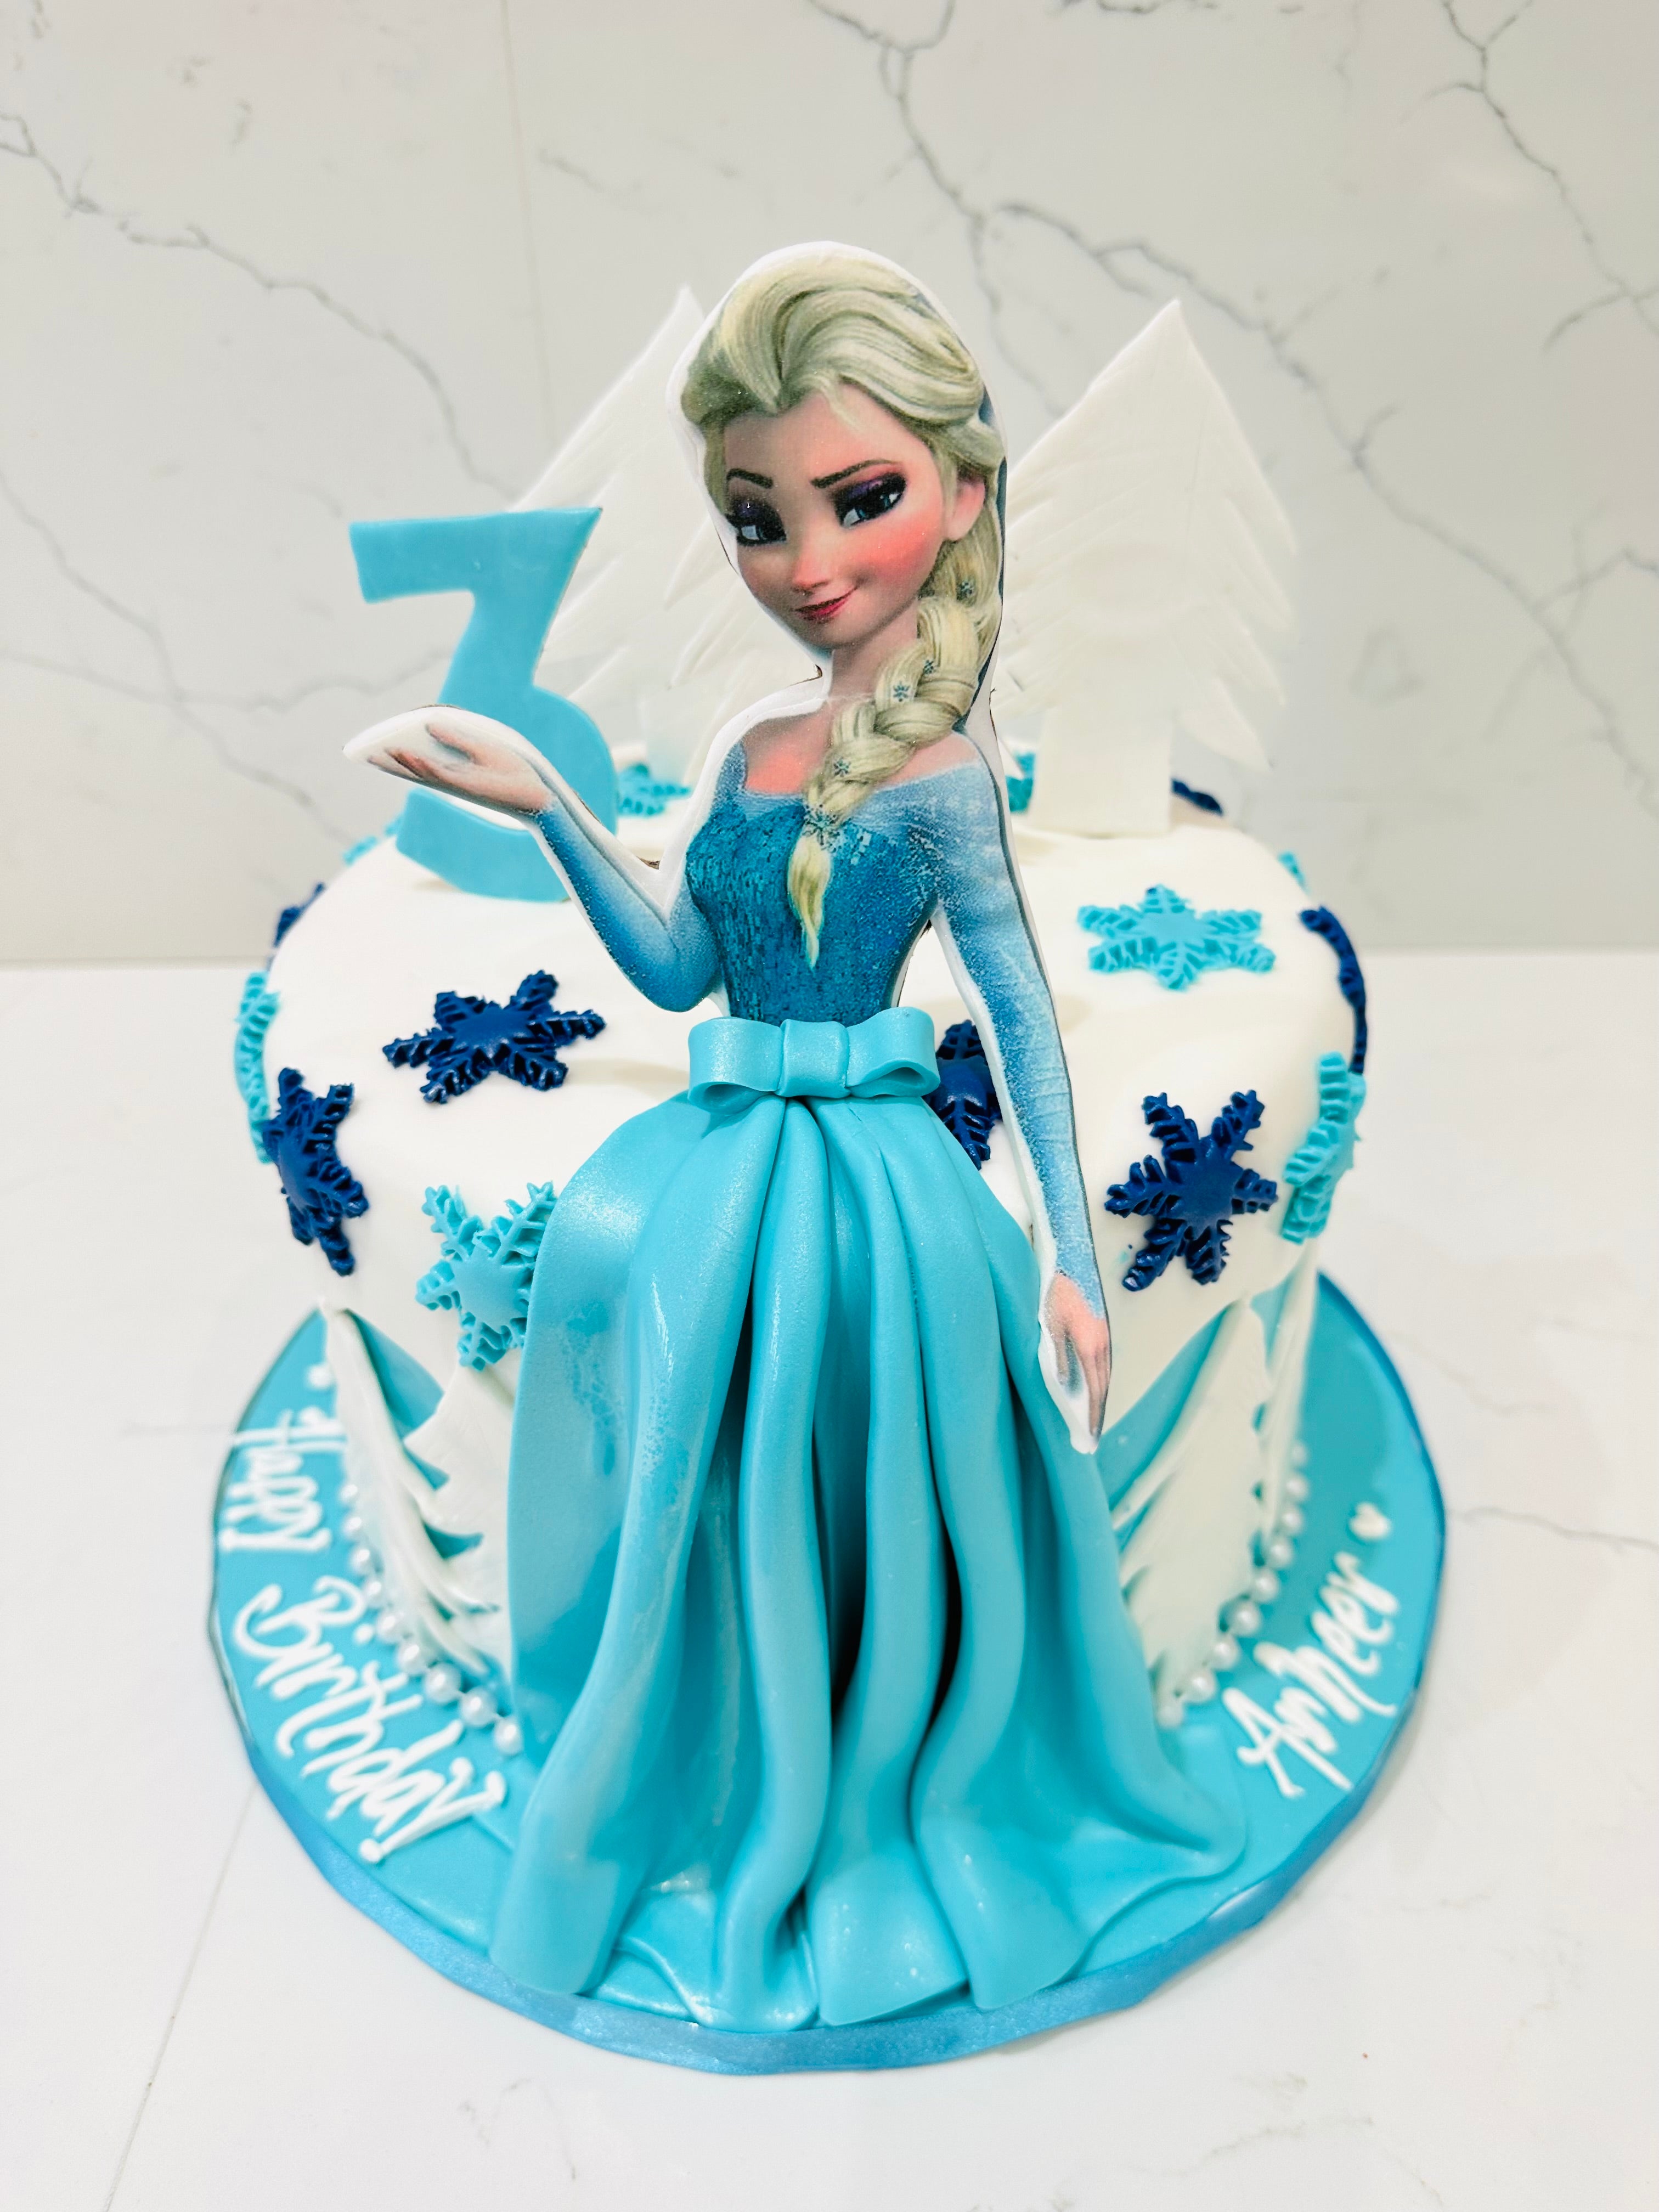 Olaf From Frozen Birthday Cake! - JUNIPER CAKERY | Cakes and Sweet Treats!